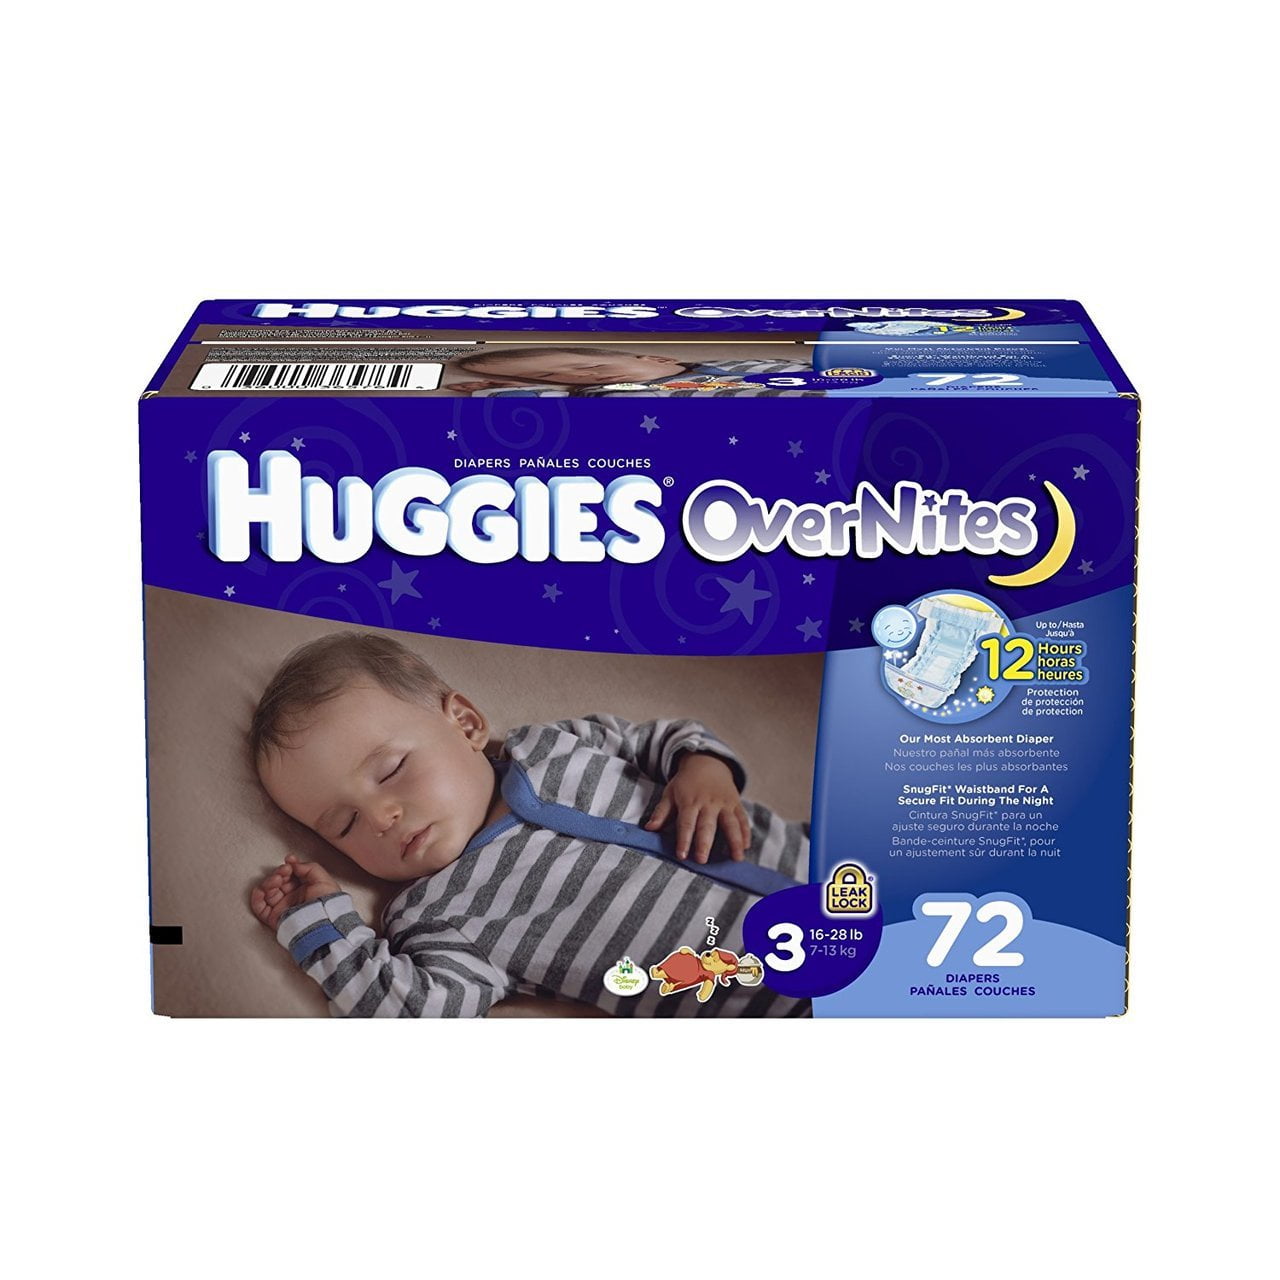 Huggies OverNites Diapers Big Pack 72 Count Size 3 